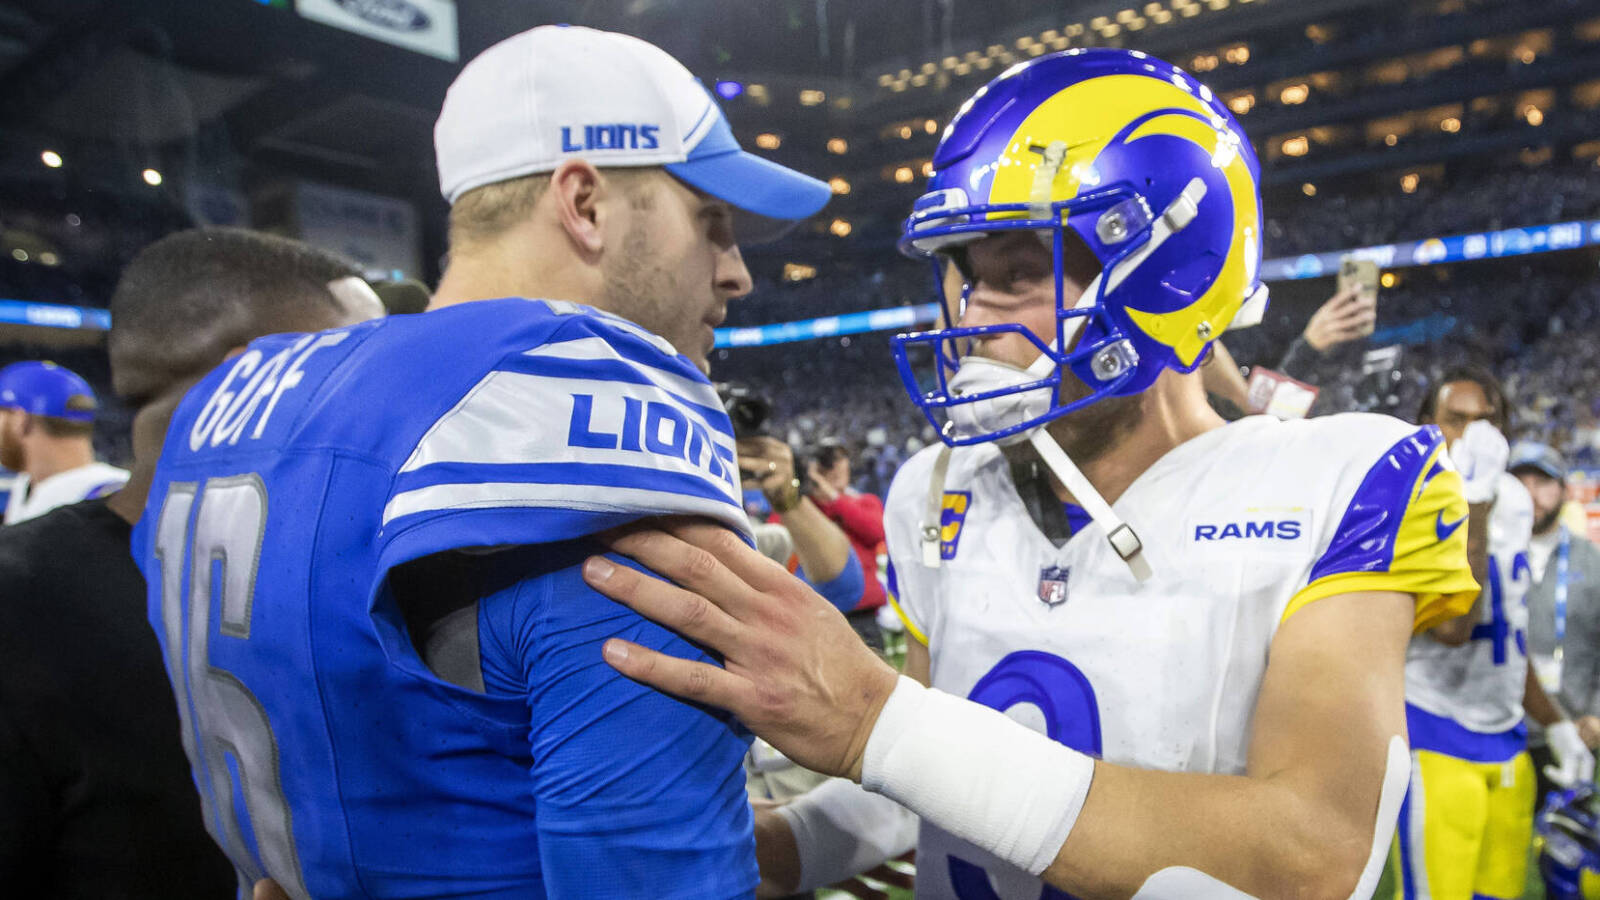 Watch: Matthew Stafford gives five words of encouragement for Jared Goff after Rams-Lions game